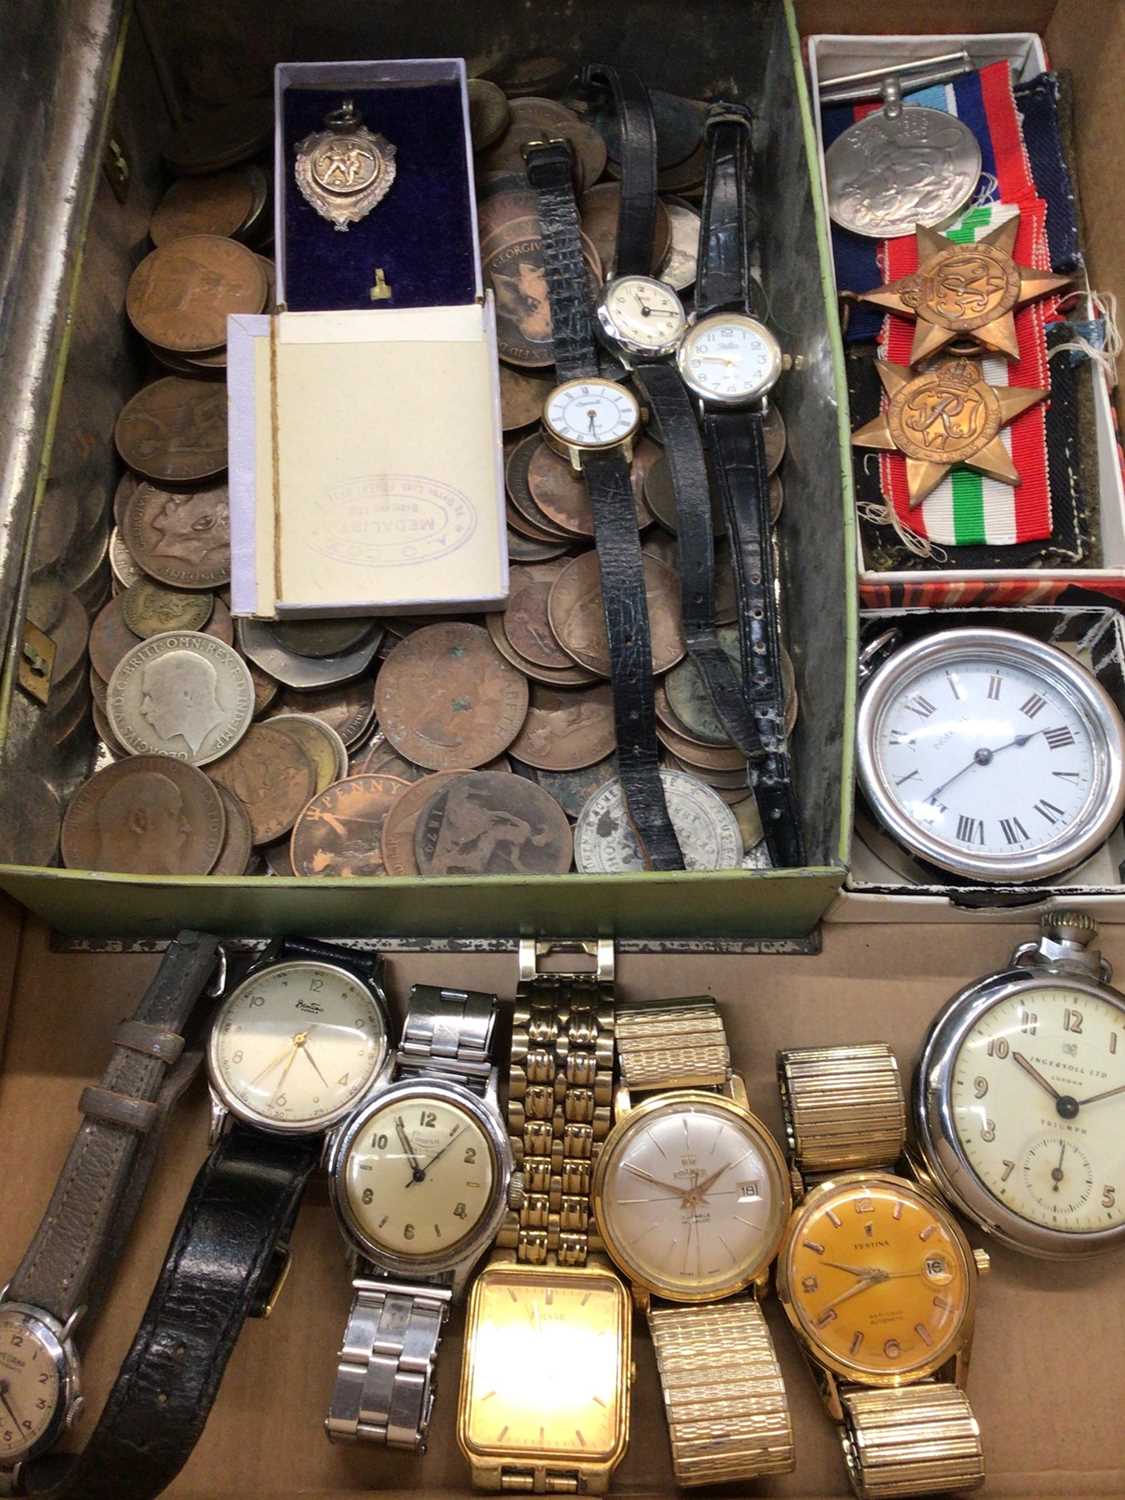 Lot 972 - Vintage wristwatches, two Ingersoll pocket watches, WWII medals and collection of coins